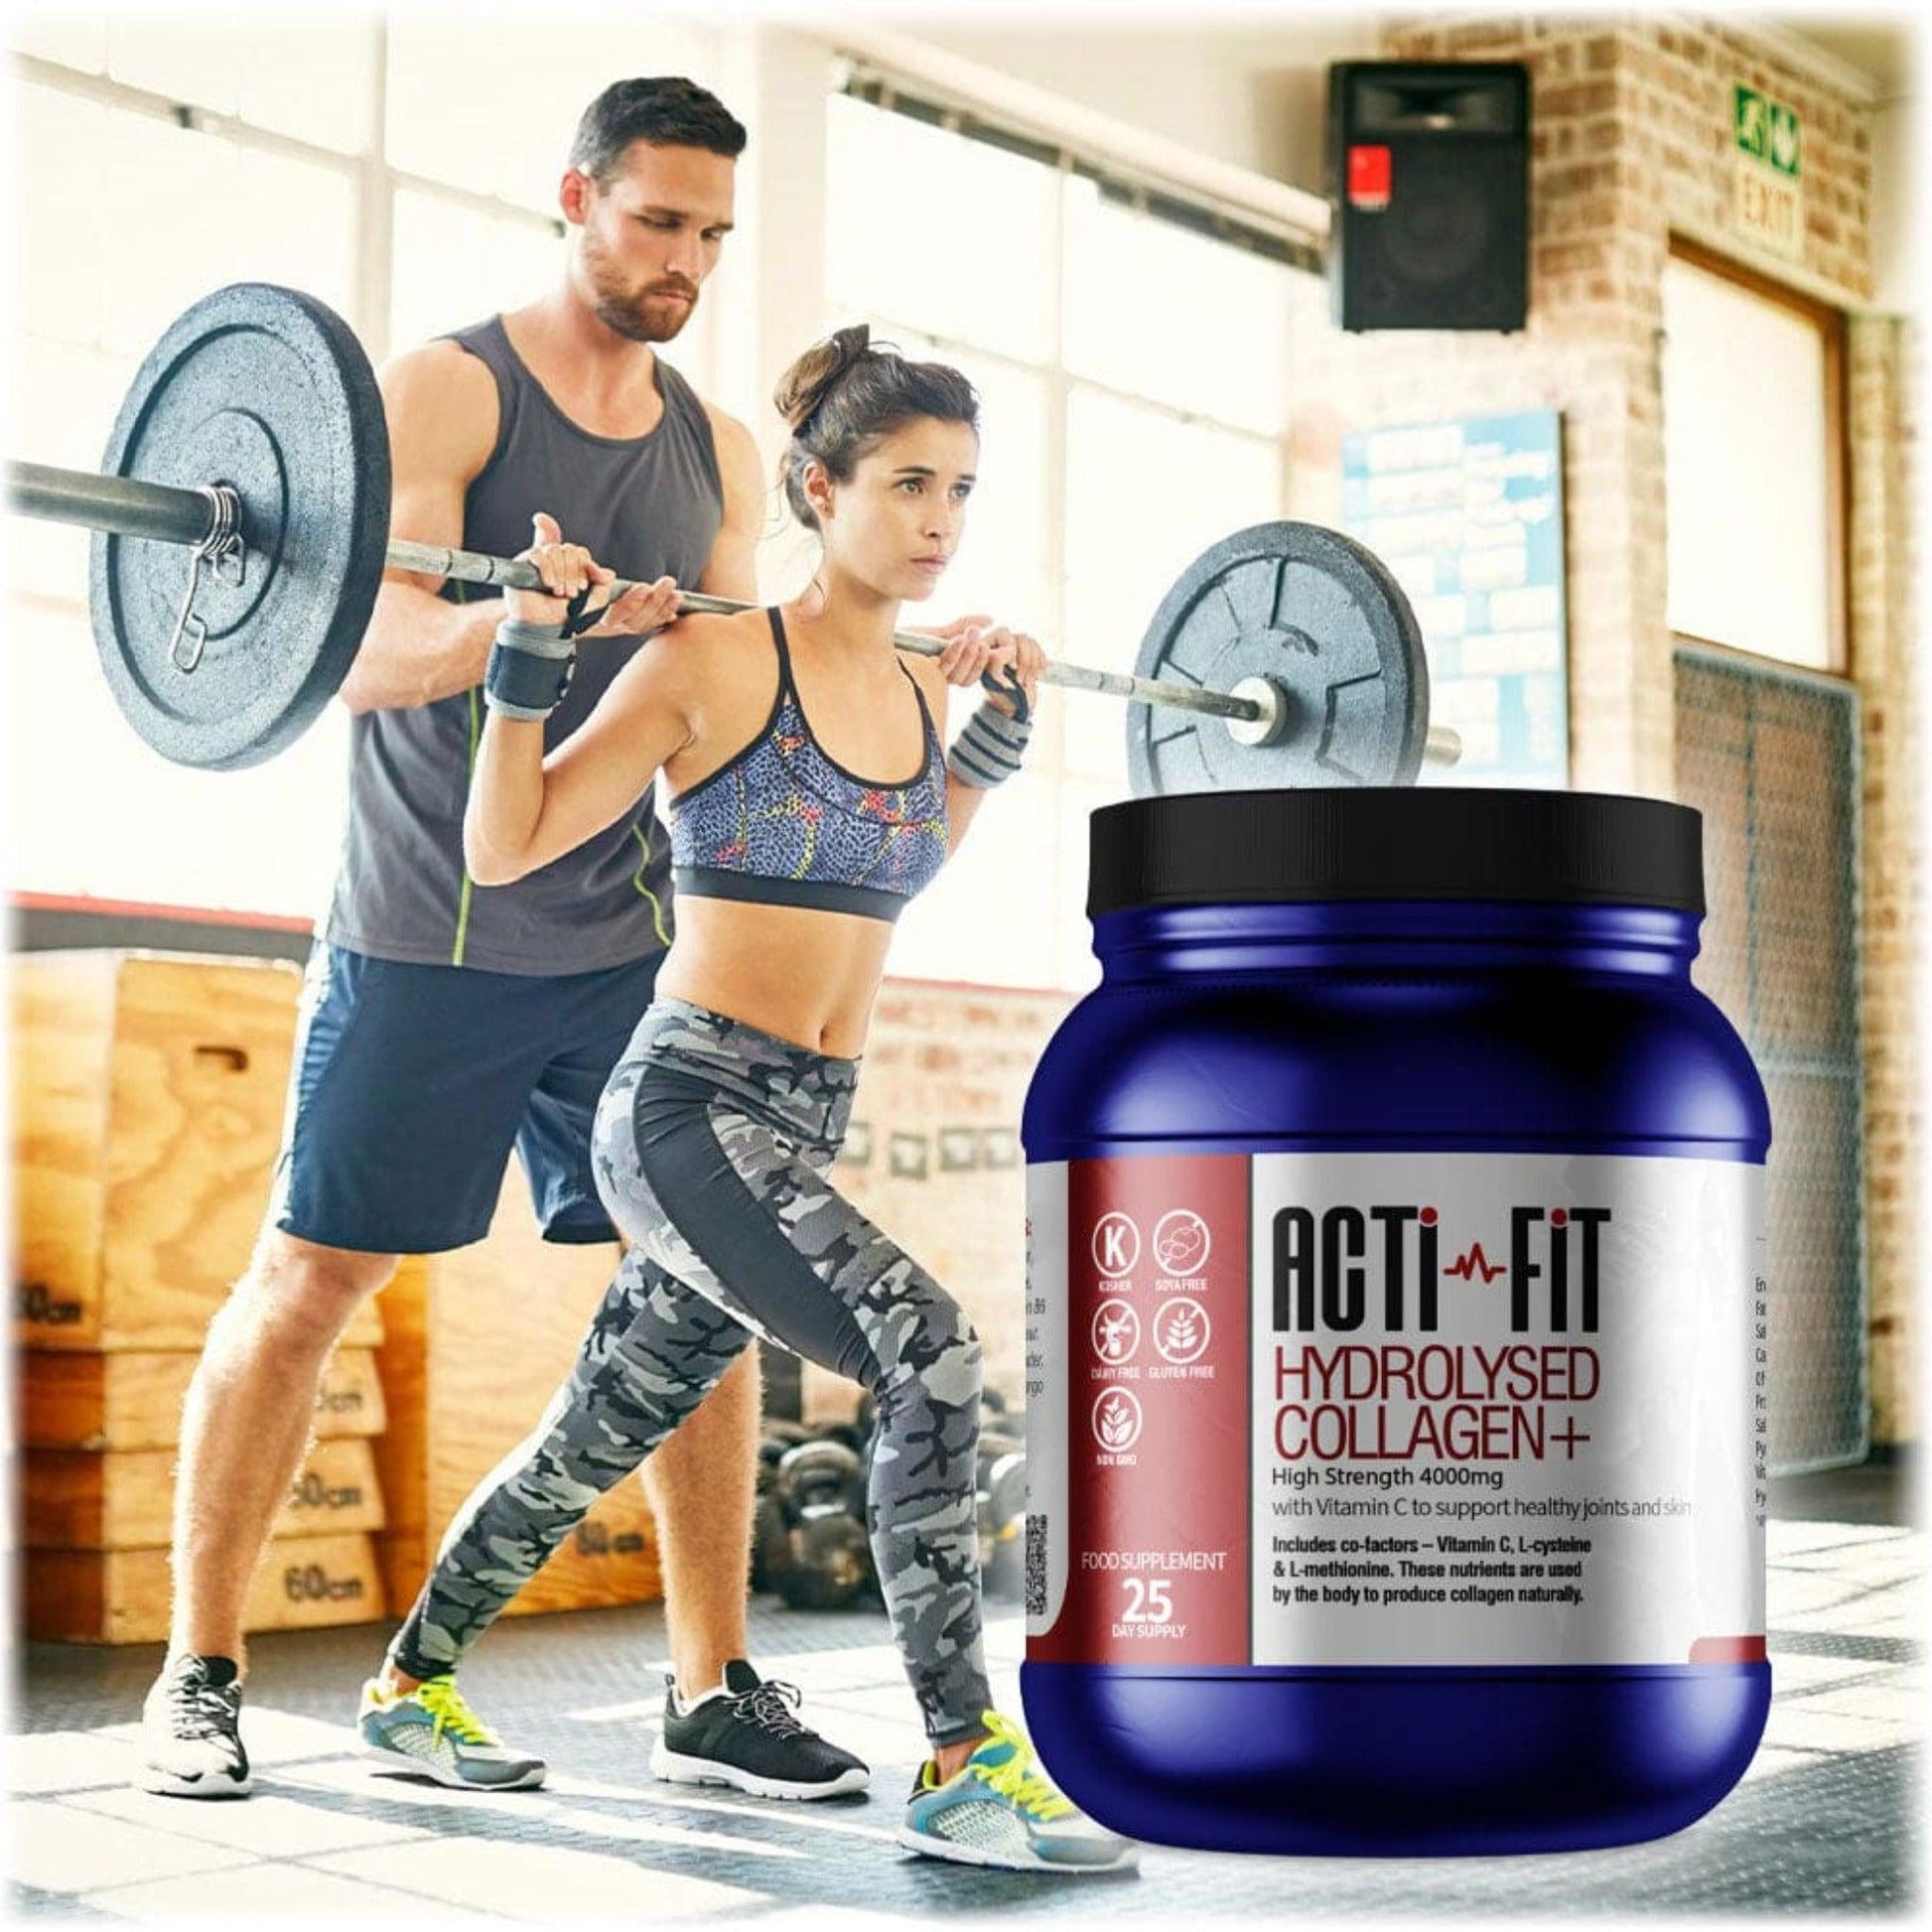 A man and woman working out with a weight bar at the gym with a tub of Acti-Fit Hydrolysed Collagen 4000mg High Strength in the foreground